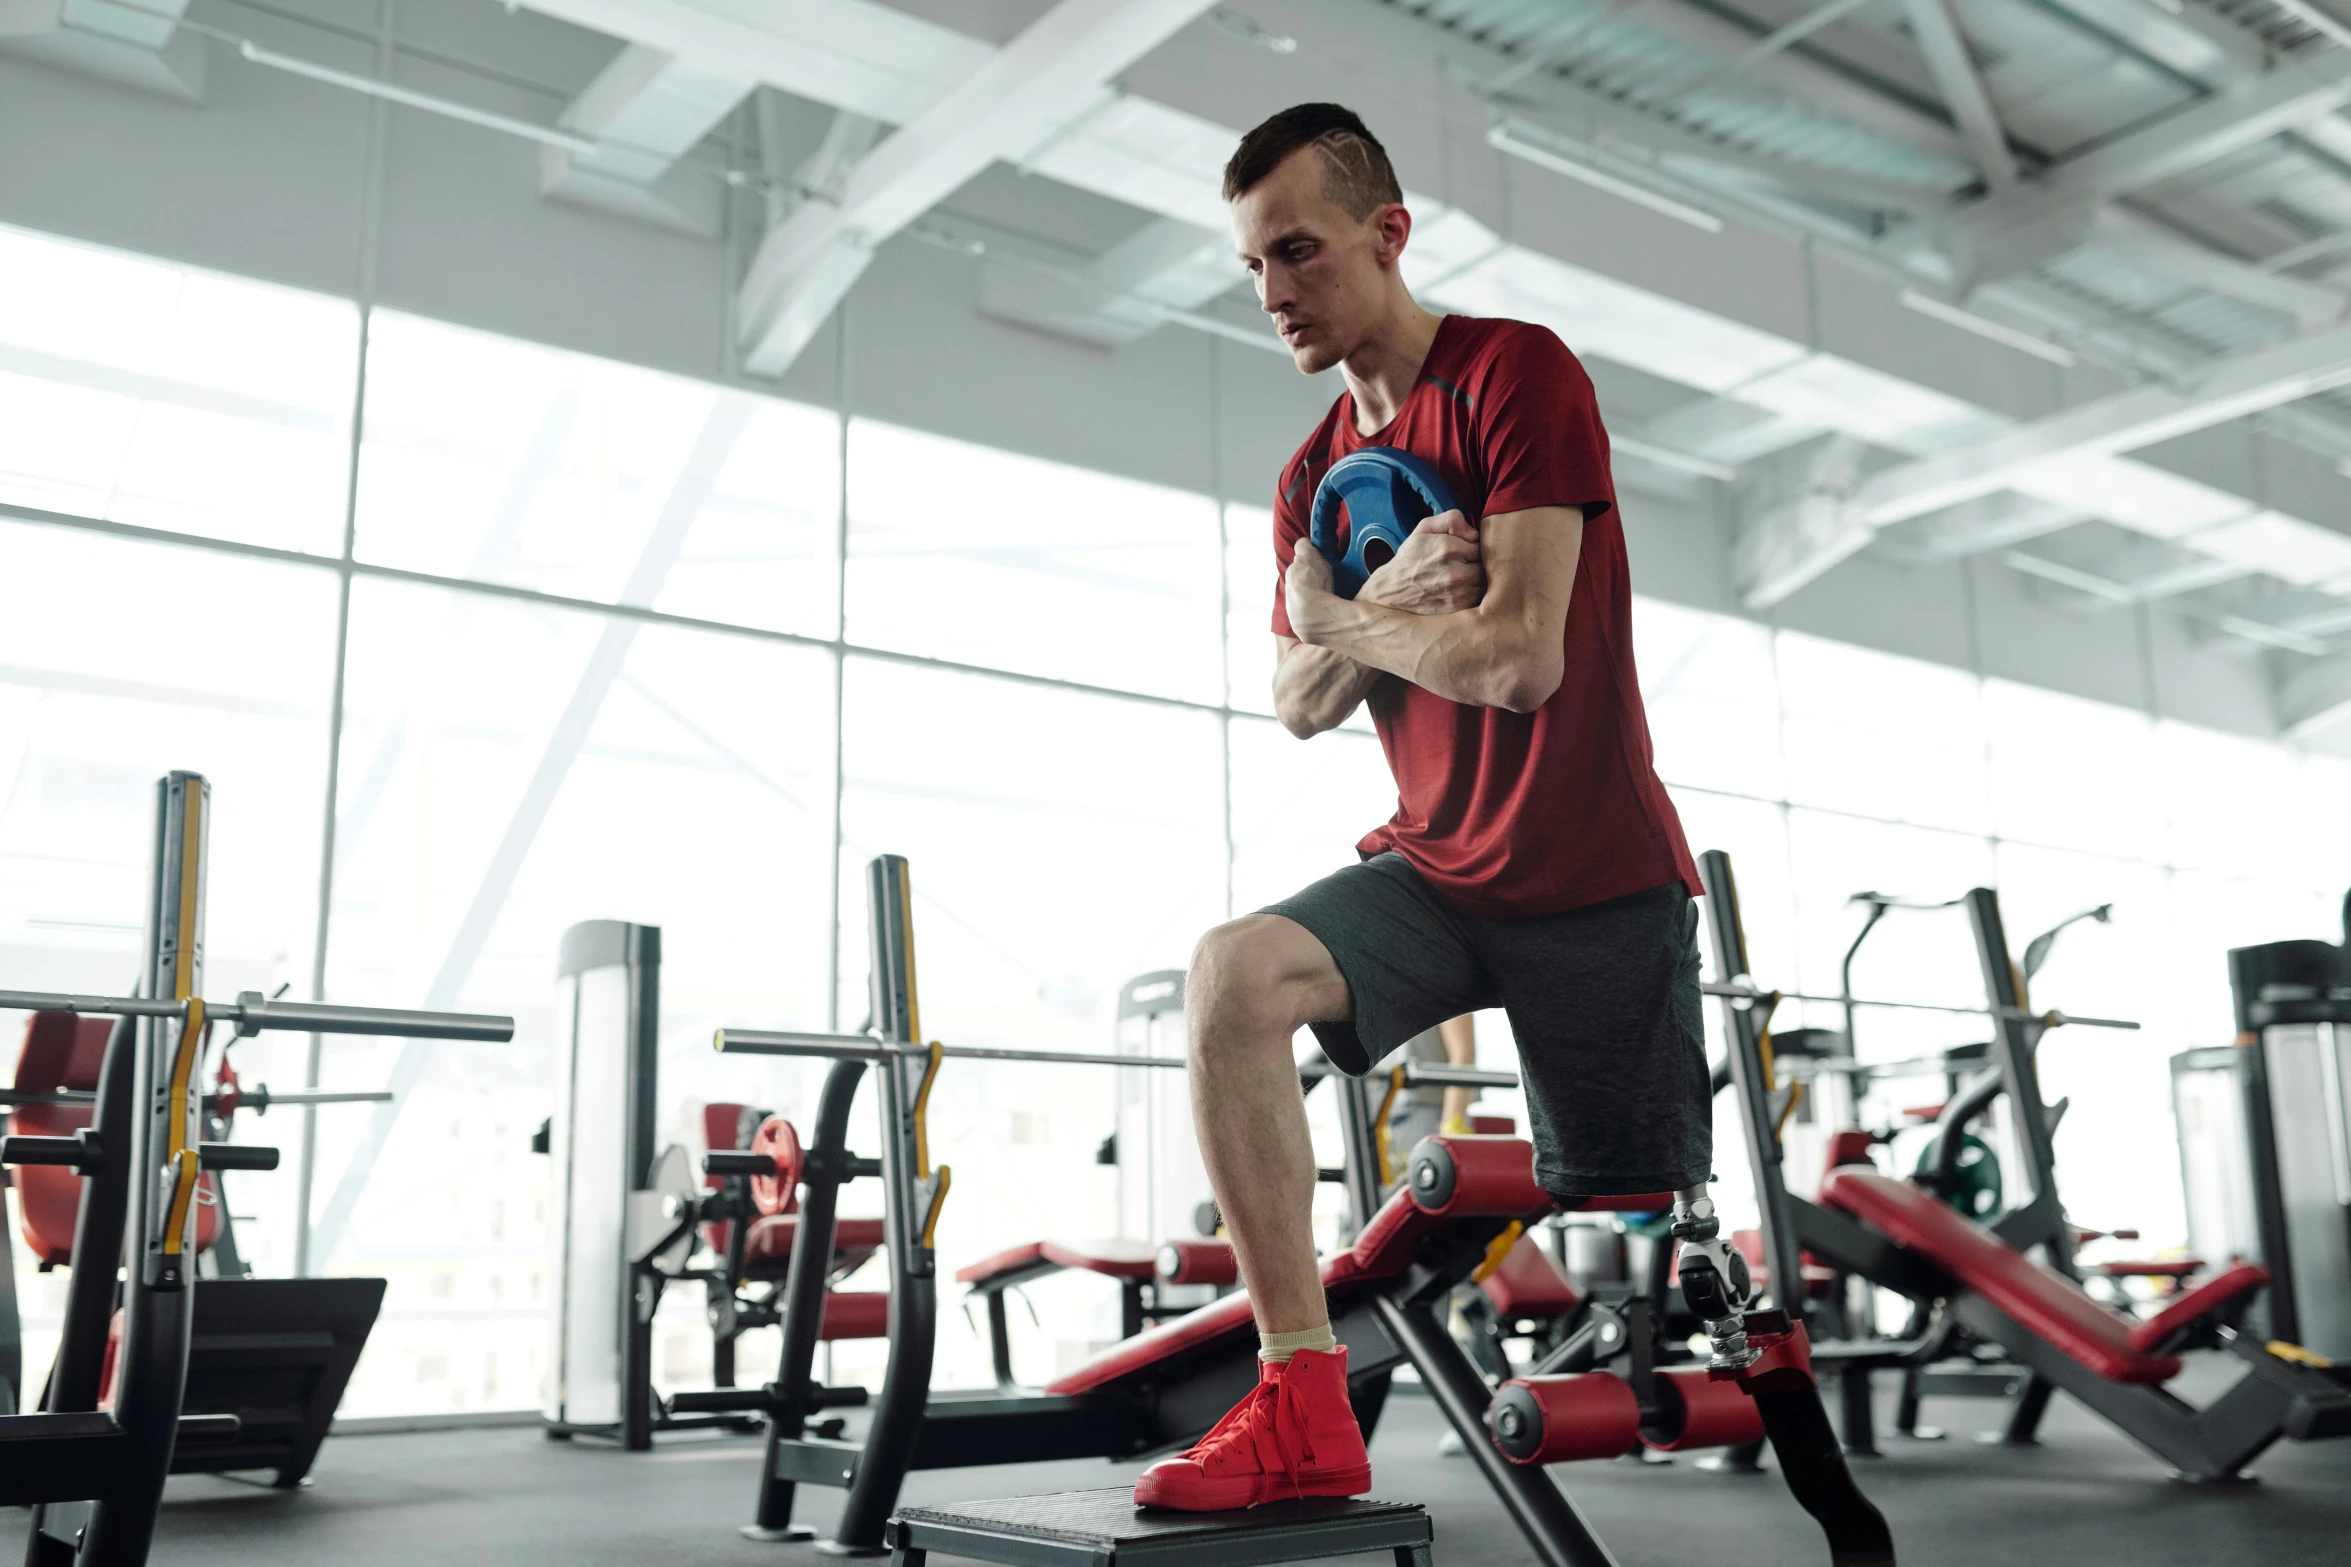 a man is squatting on a bench in a gym, pexels contest winner, red sport clothing, square, no watermarks, in style of kyrill kotashev